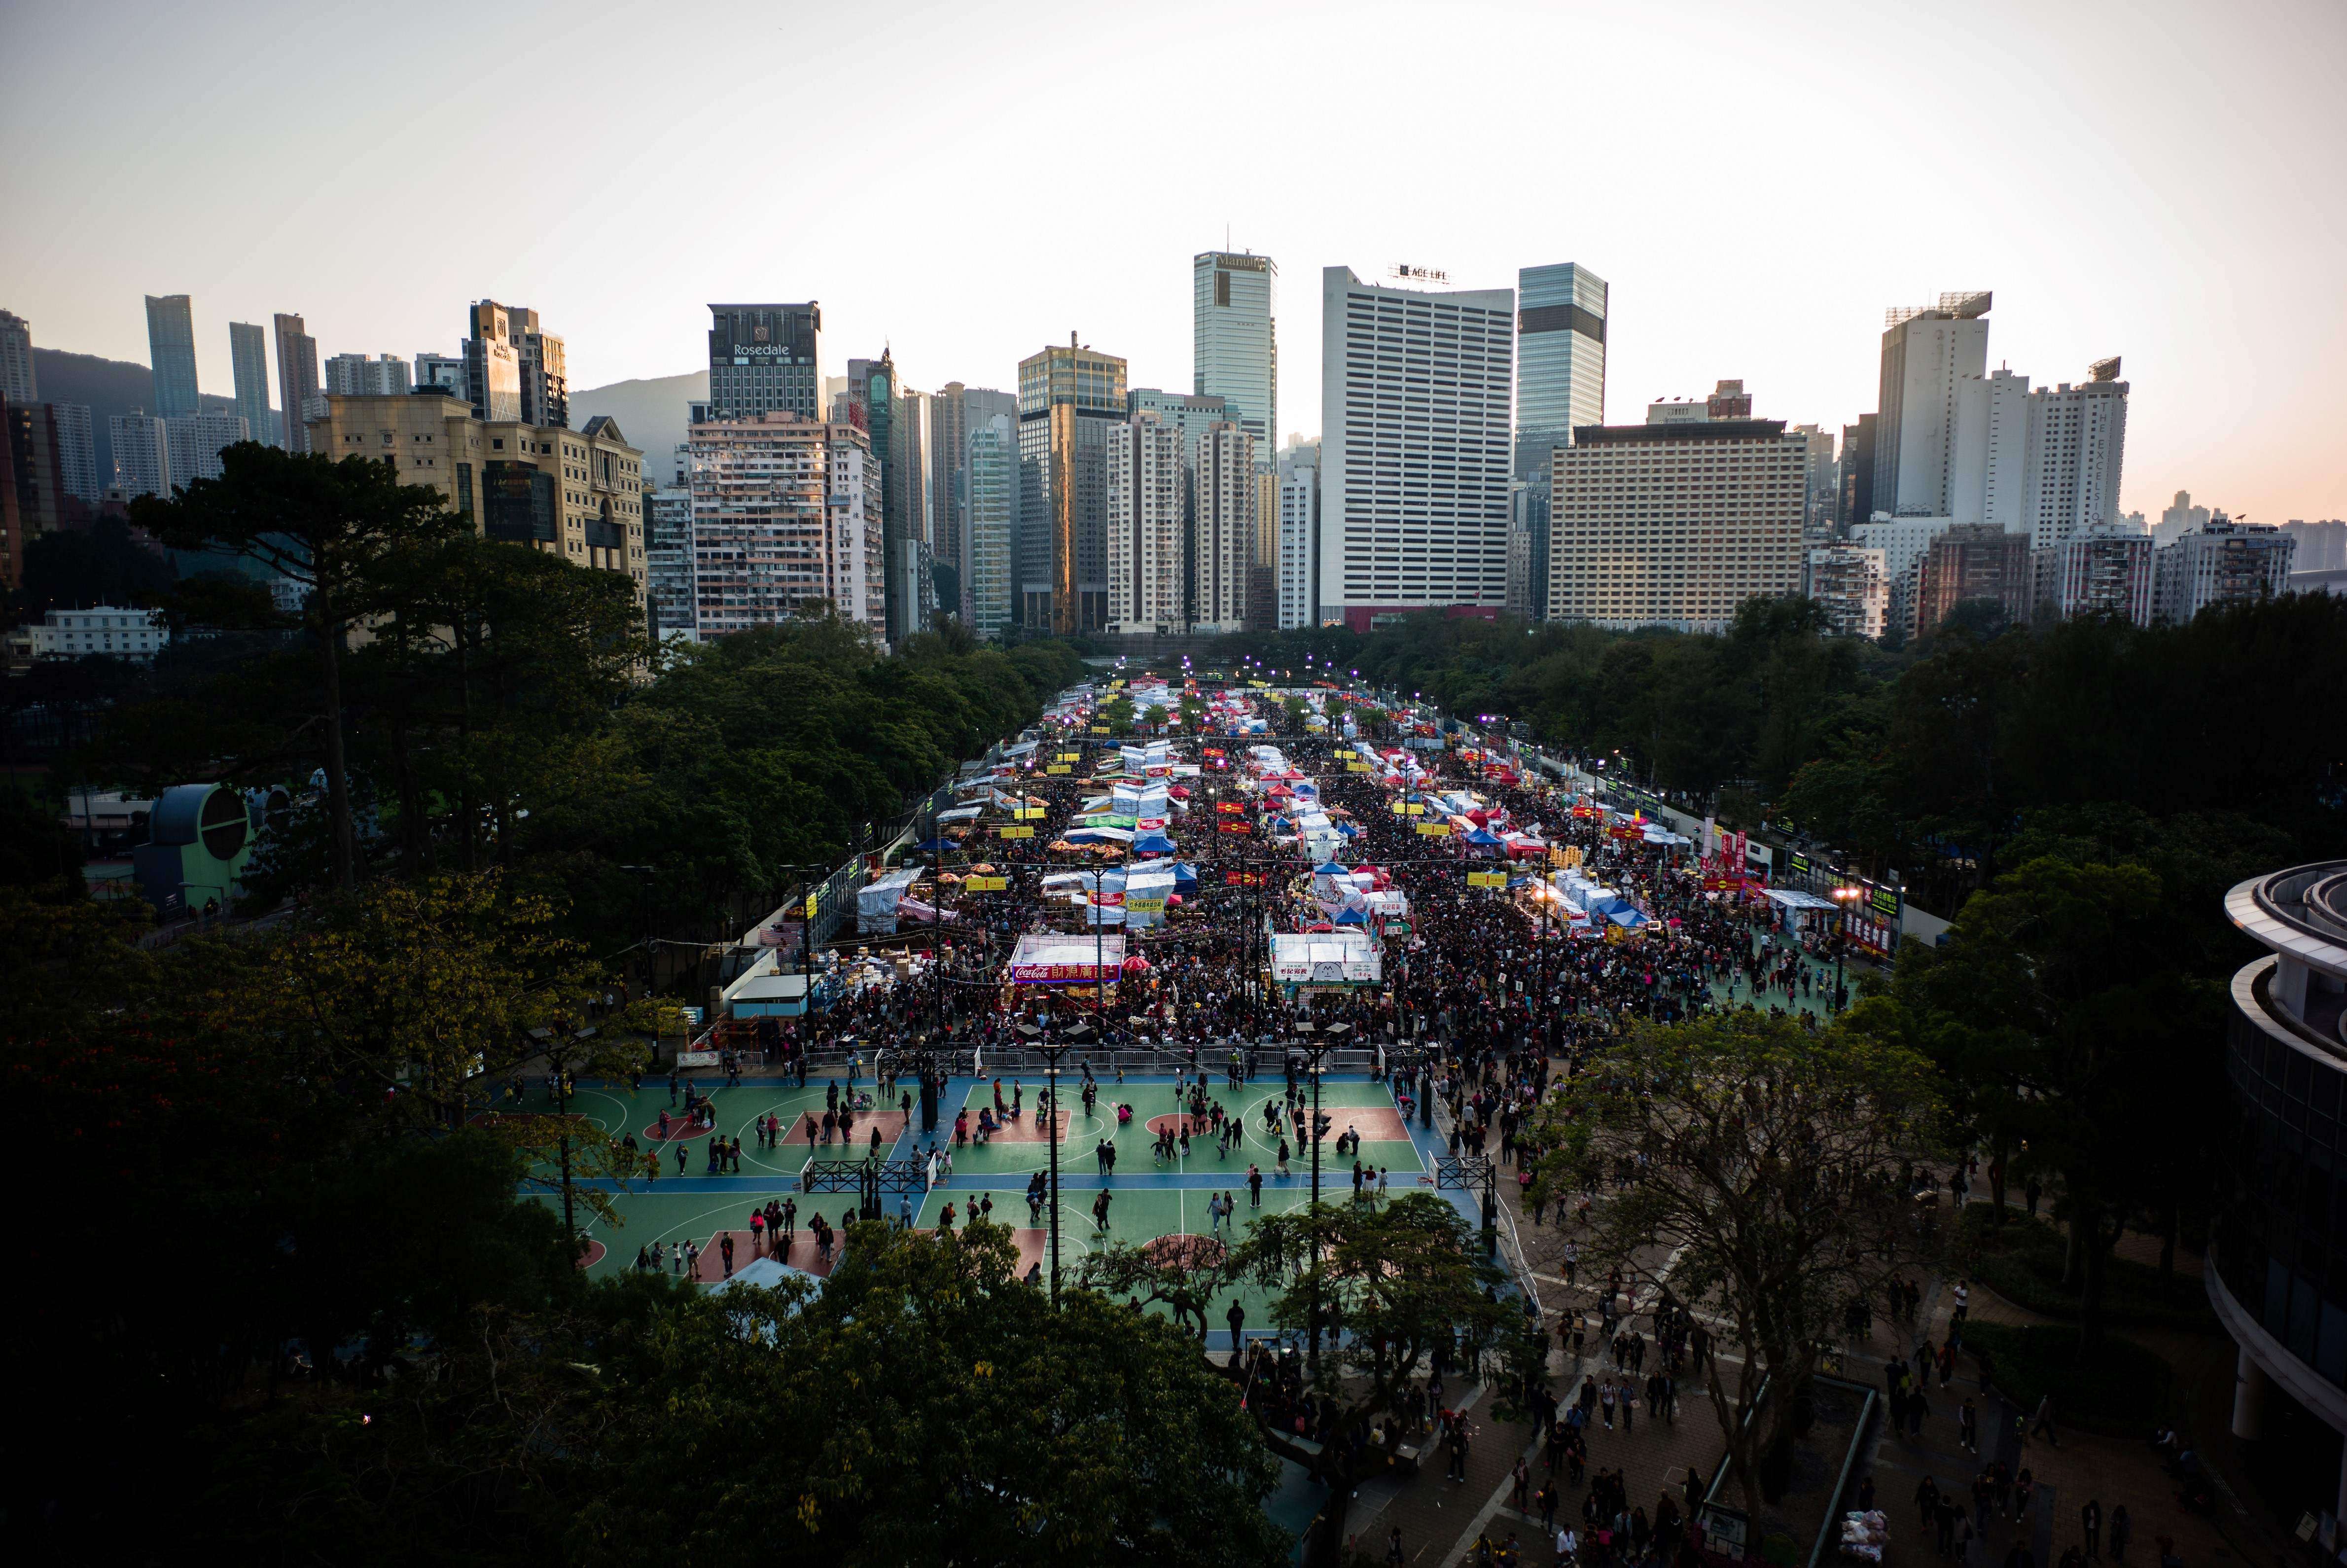 Hong Kong people throng the Victoria Park New Year flower market on January 27, on the eve of the Lunar New Year holiday. Victoria Park already offers a comfortable pedestrian path network and an abundance of sports and recreational facilities. Photo: AFP